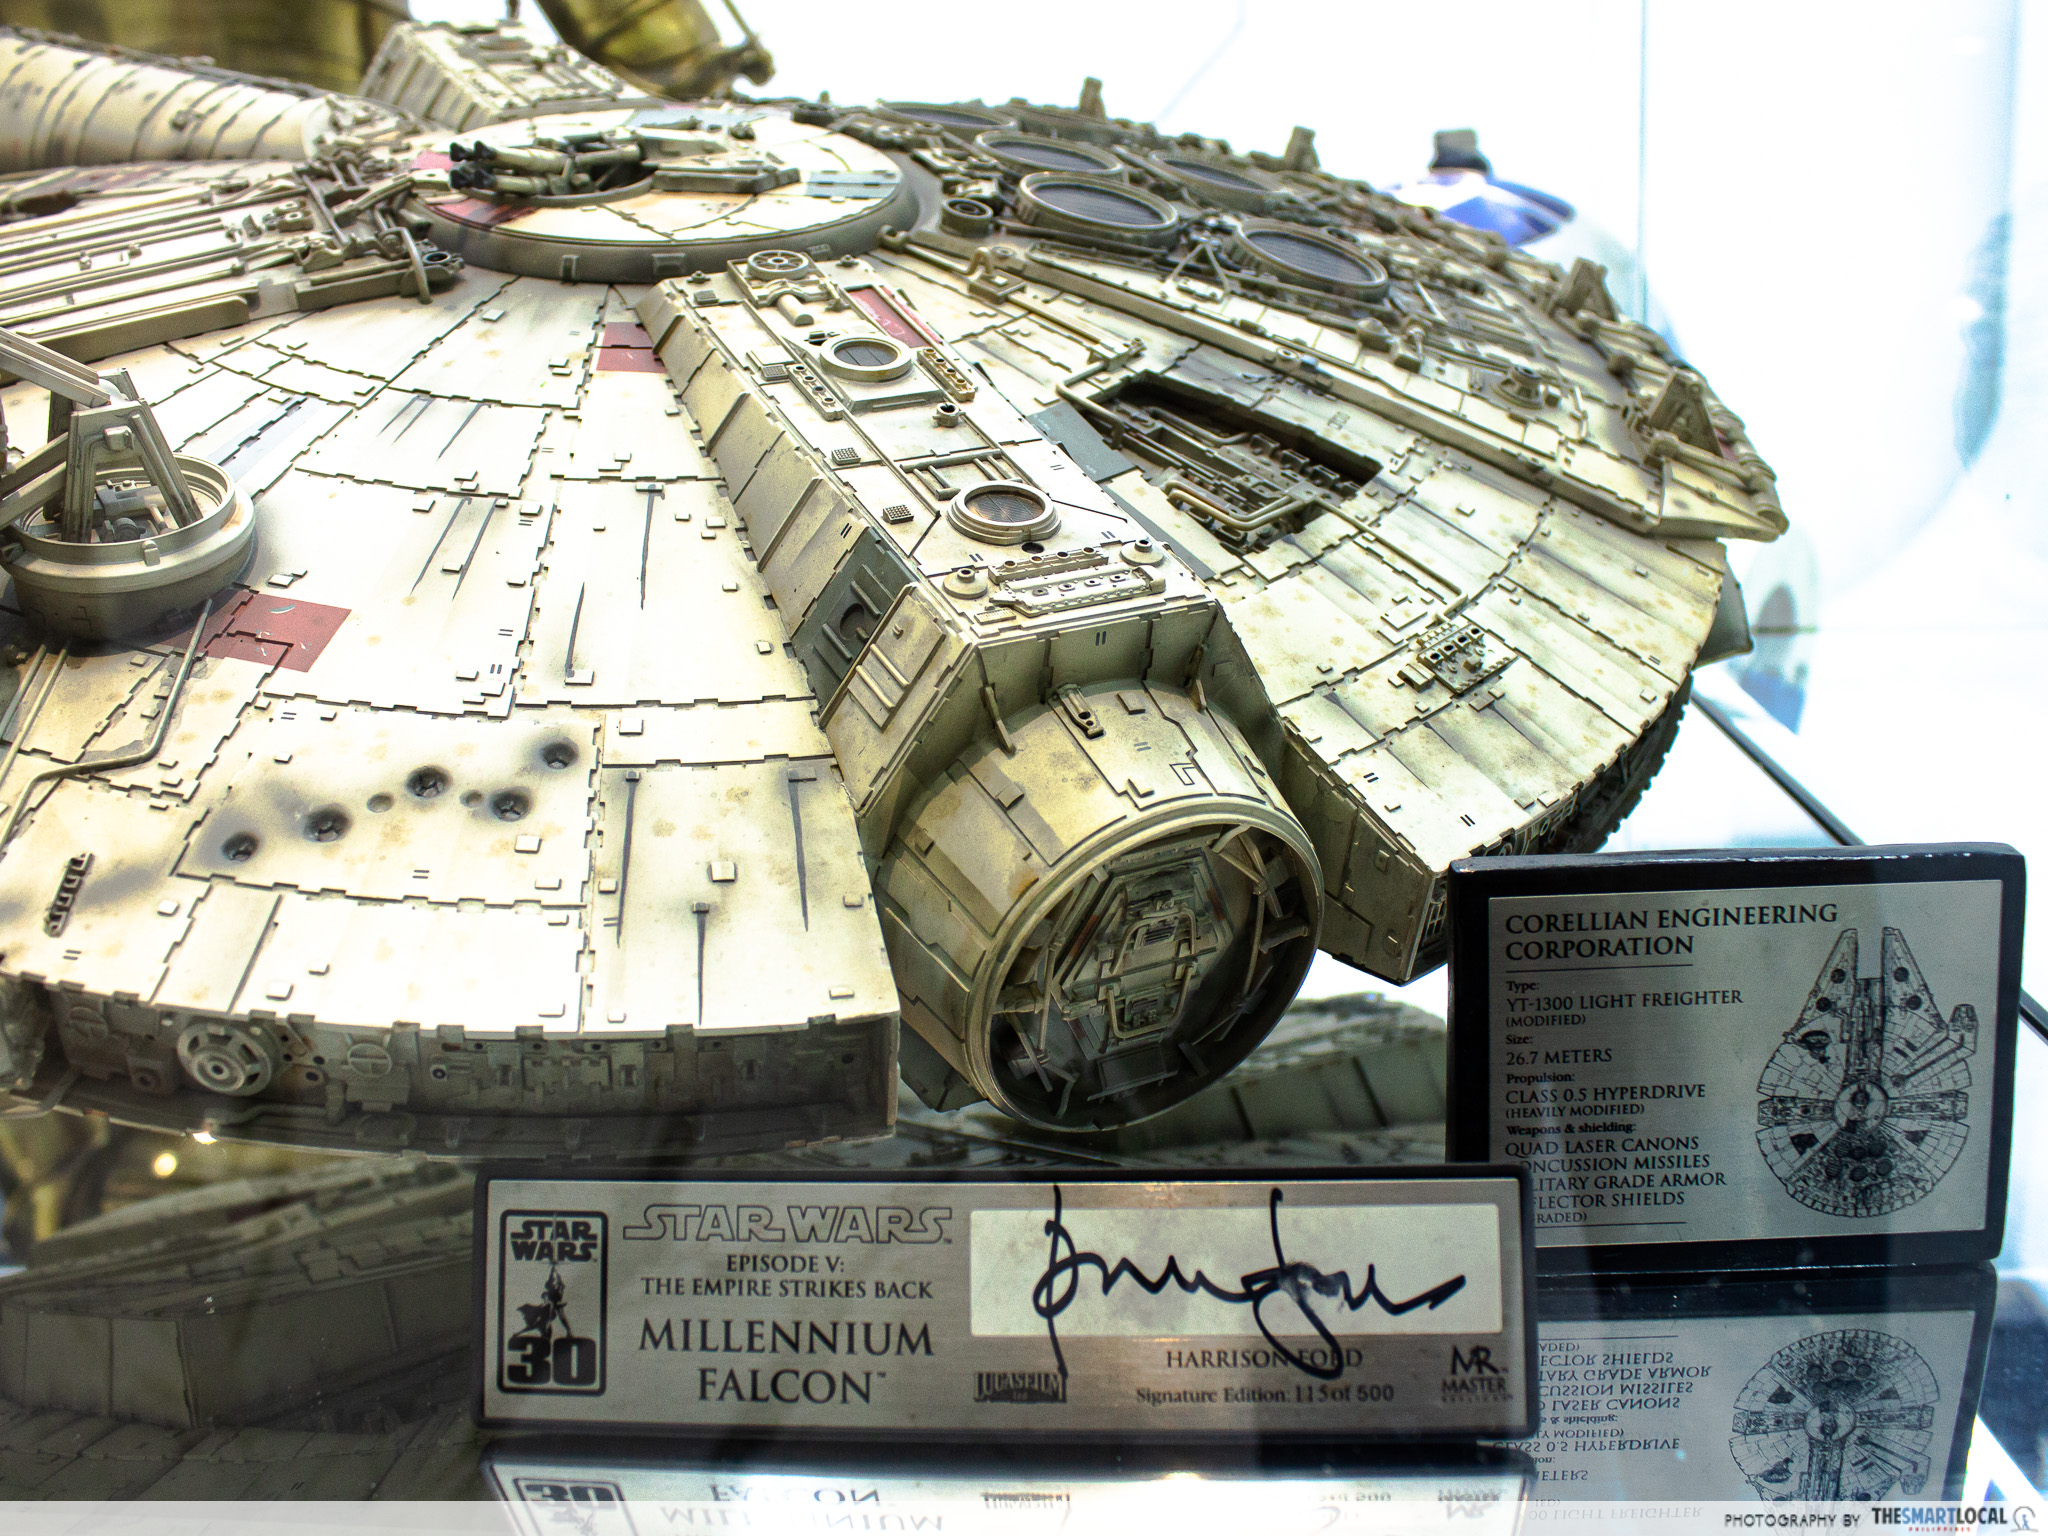 Millennium Falcon signed by Harrison Ford